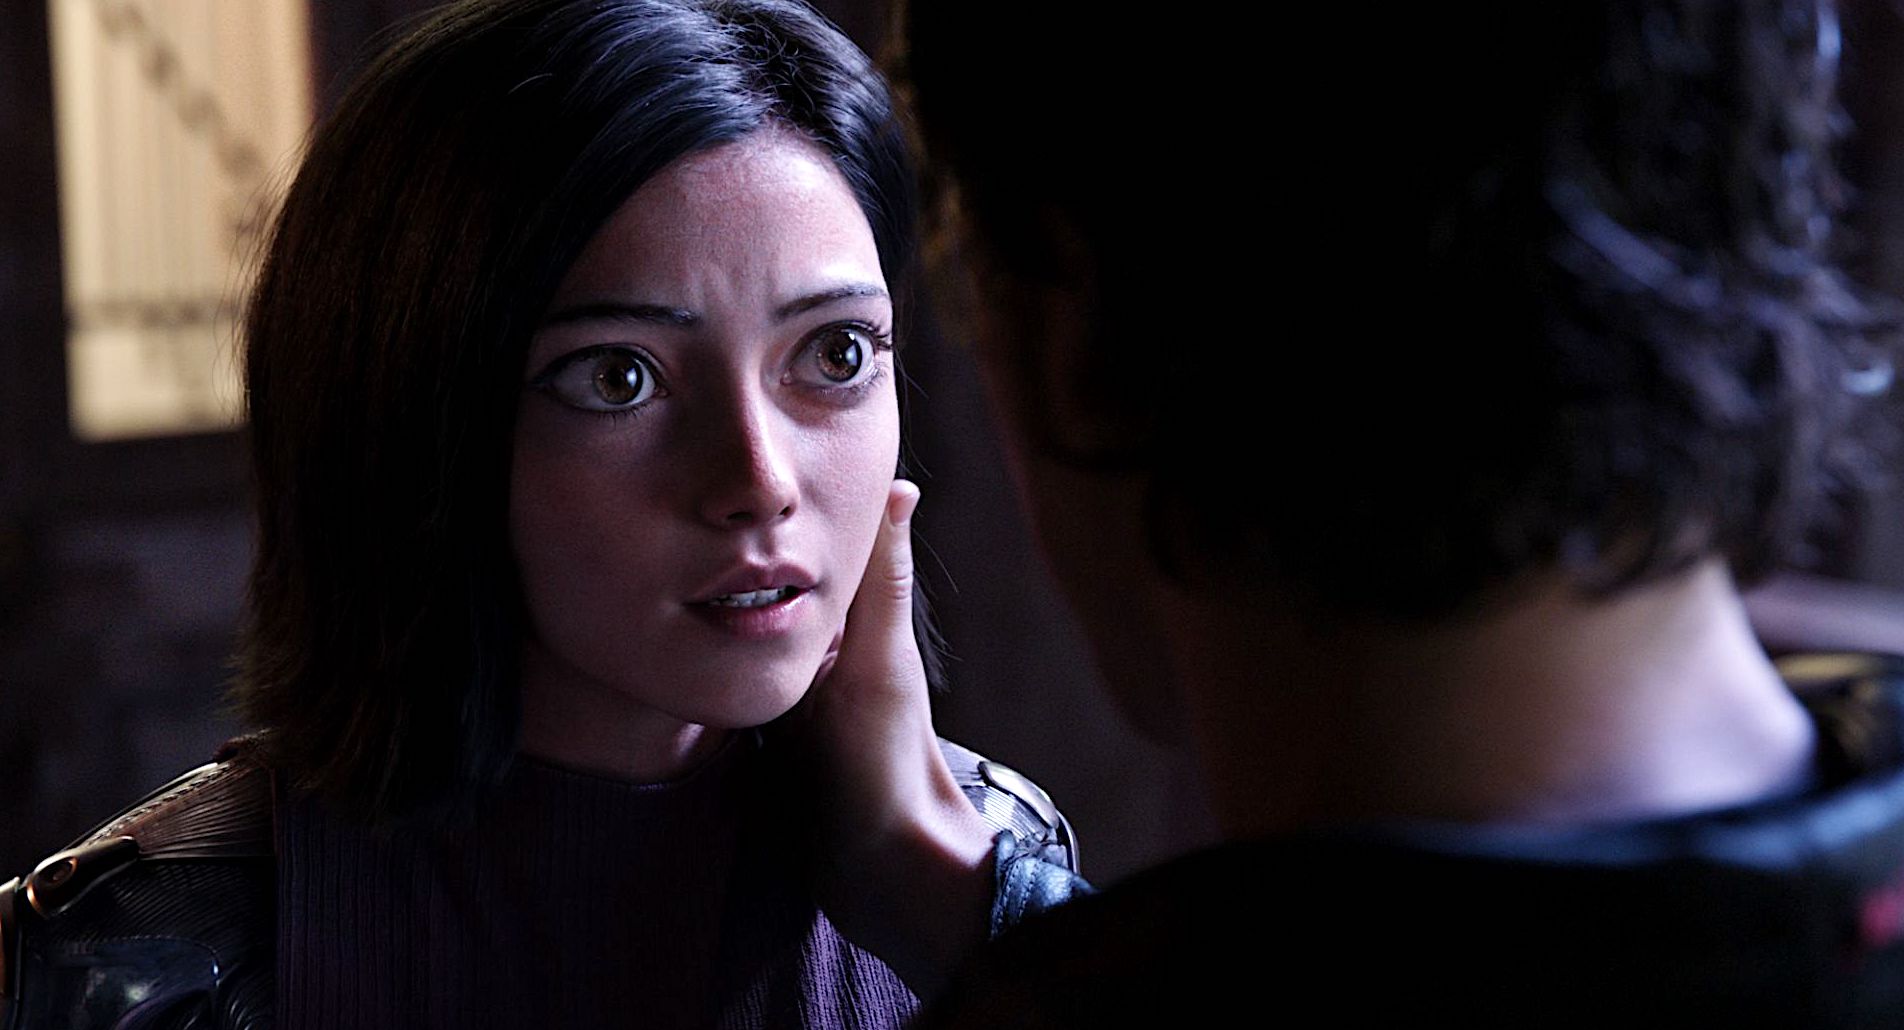 The First Latina-Superhero Arrives Courtesy of Robert Rodriguez. Official Trailer of ‘Alita: Battle Angel’